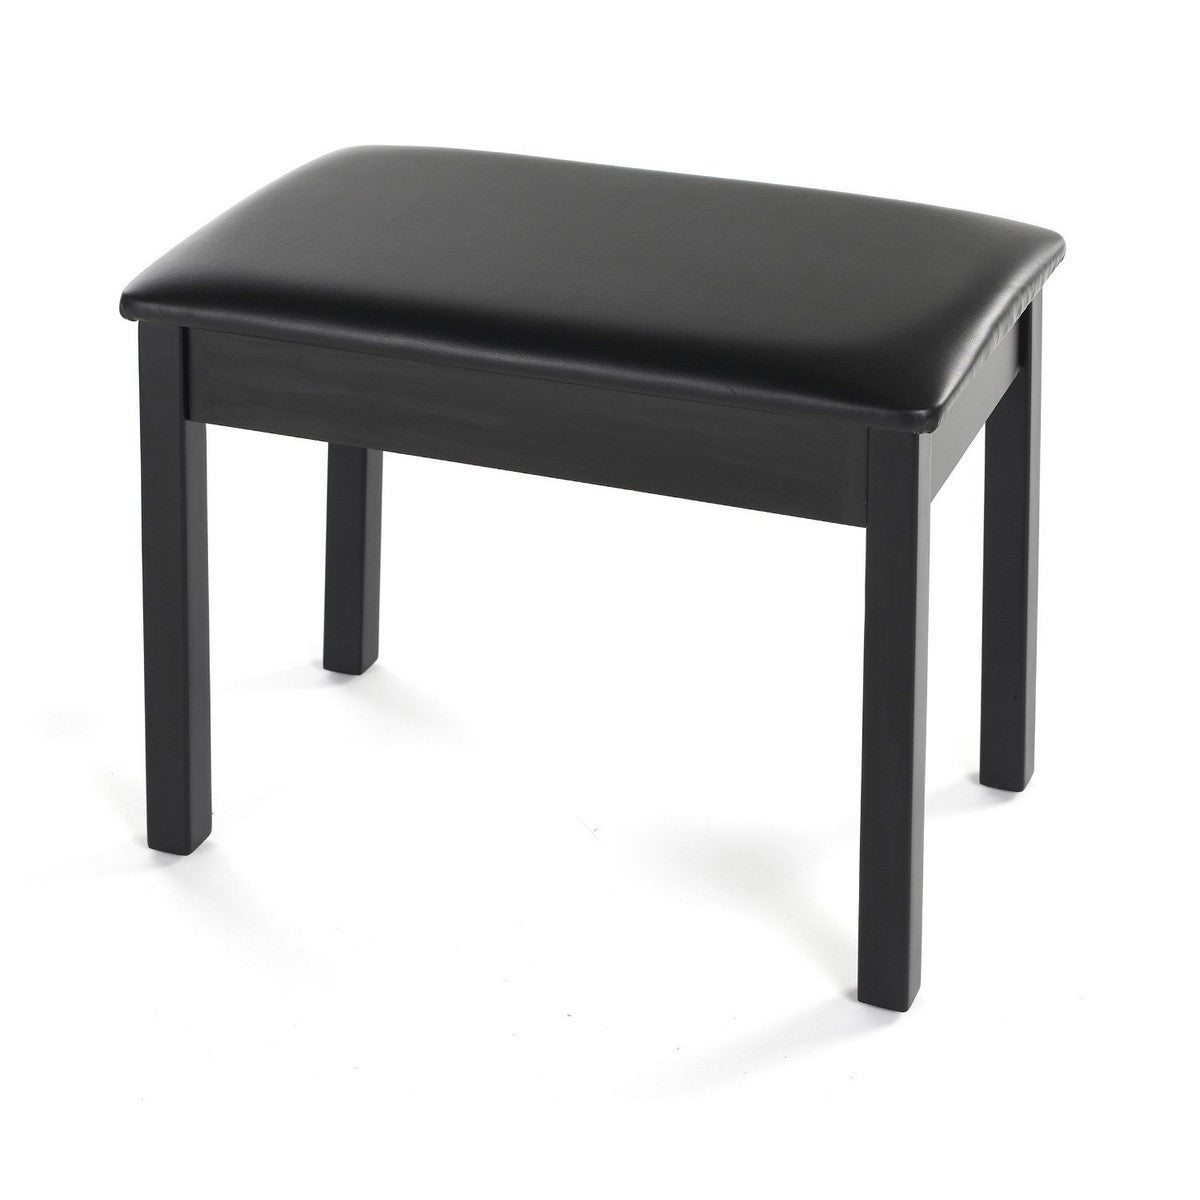 Yamaha BB1 | Black, Wood, Padded Piano Bench for Digital Pianos with a Black Finish